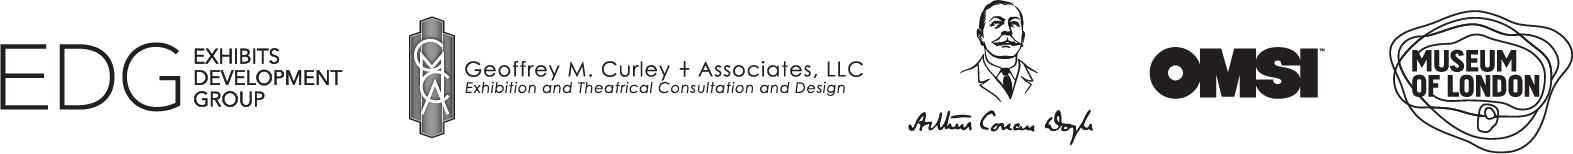 Collaborator logos: Exhibits Development Group, Geoffrey M. Curley and Associates, LLC, Arthur Conan Doyle, OMSI, and Museum of London